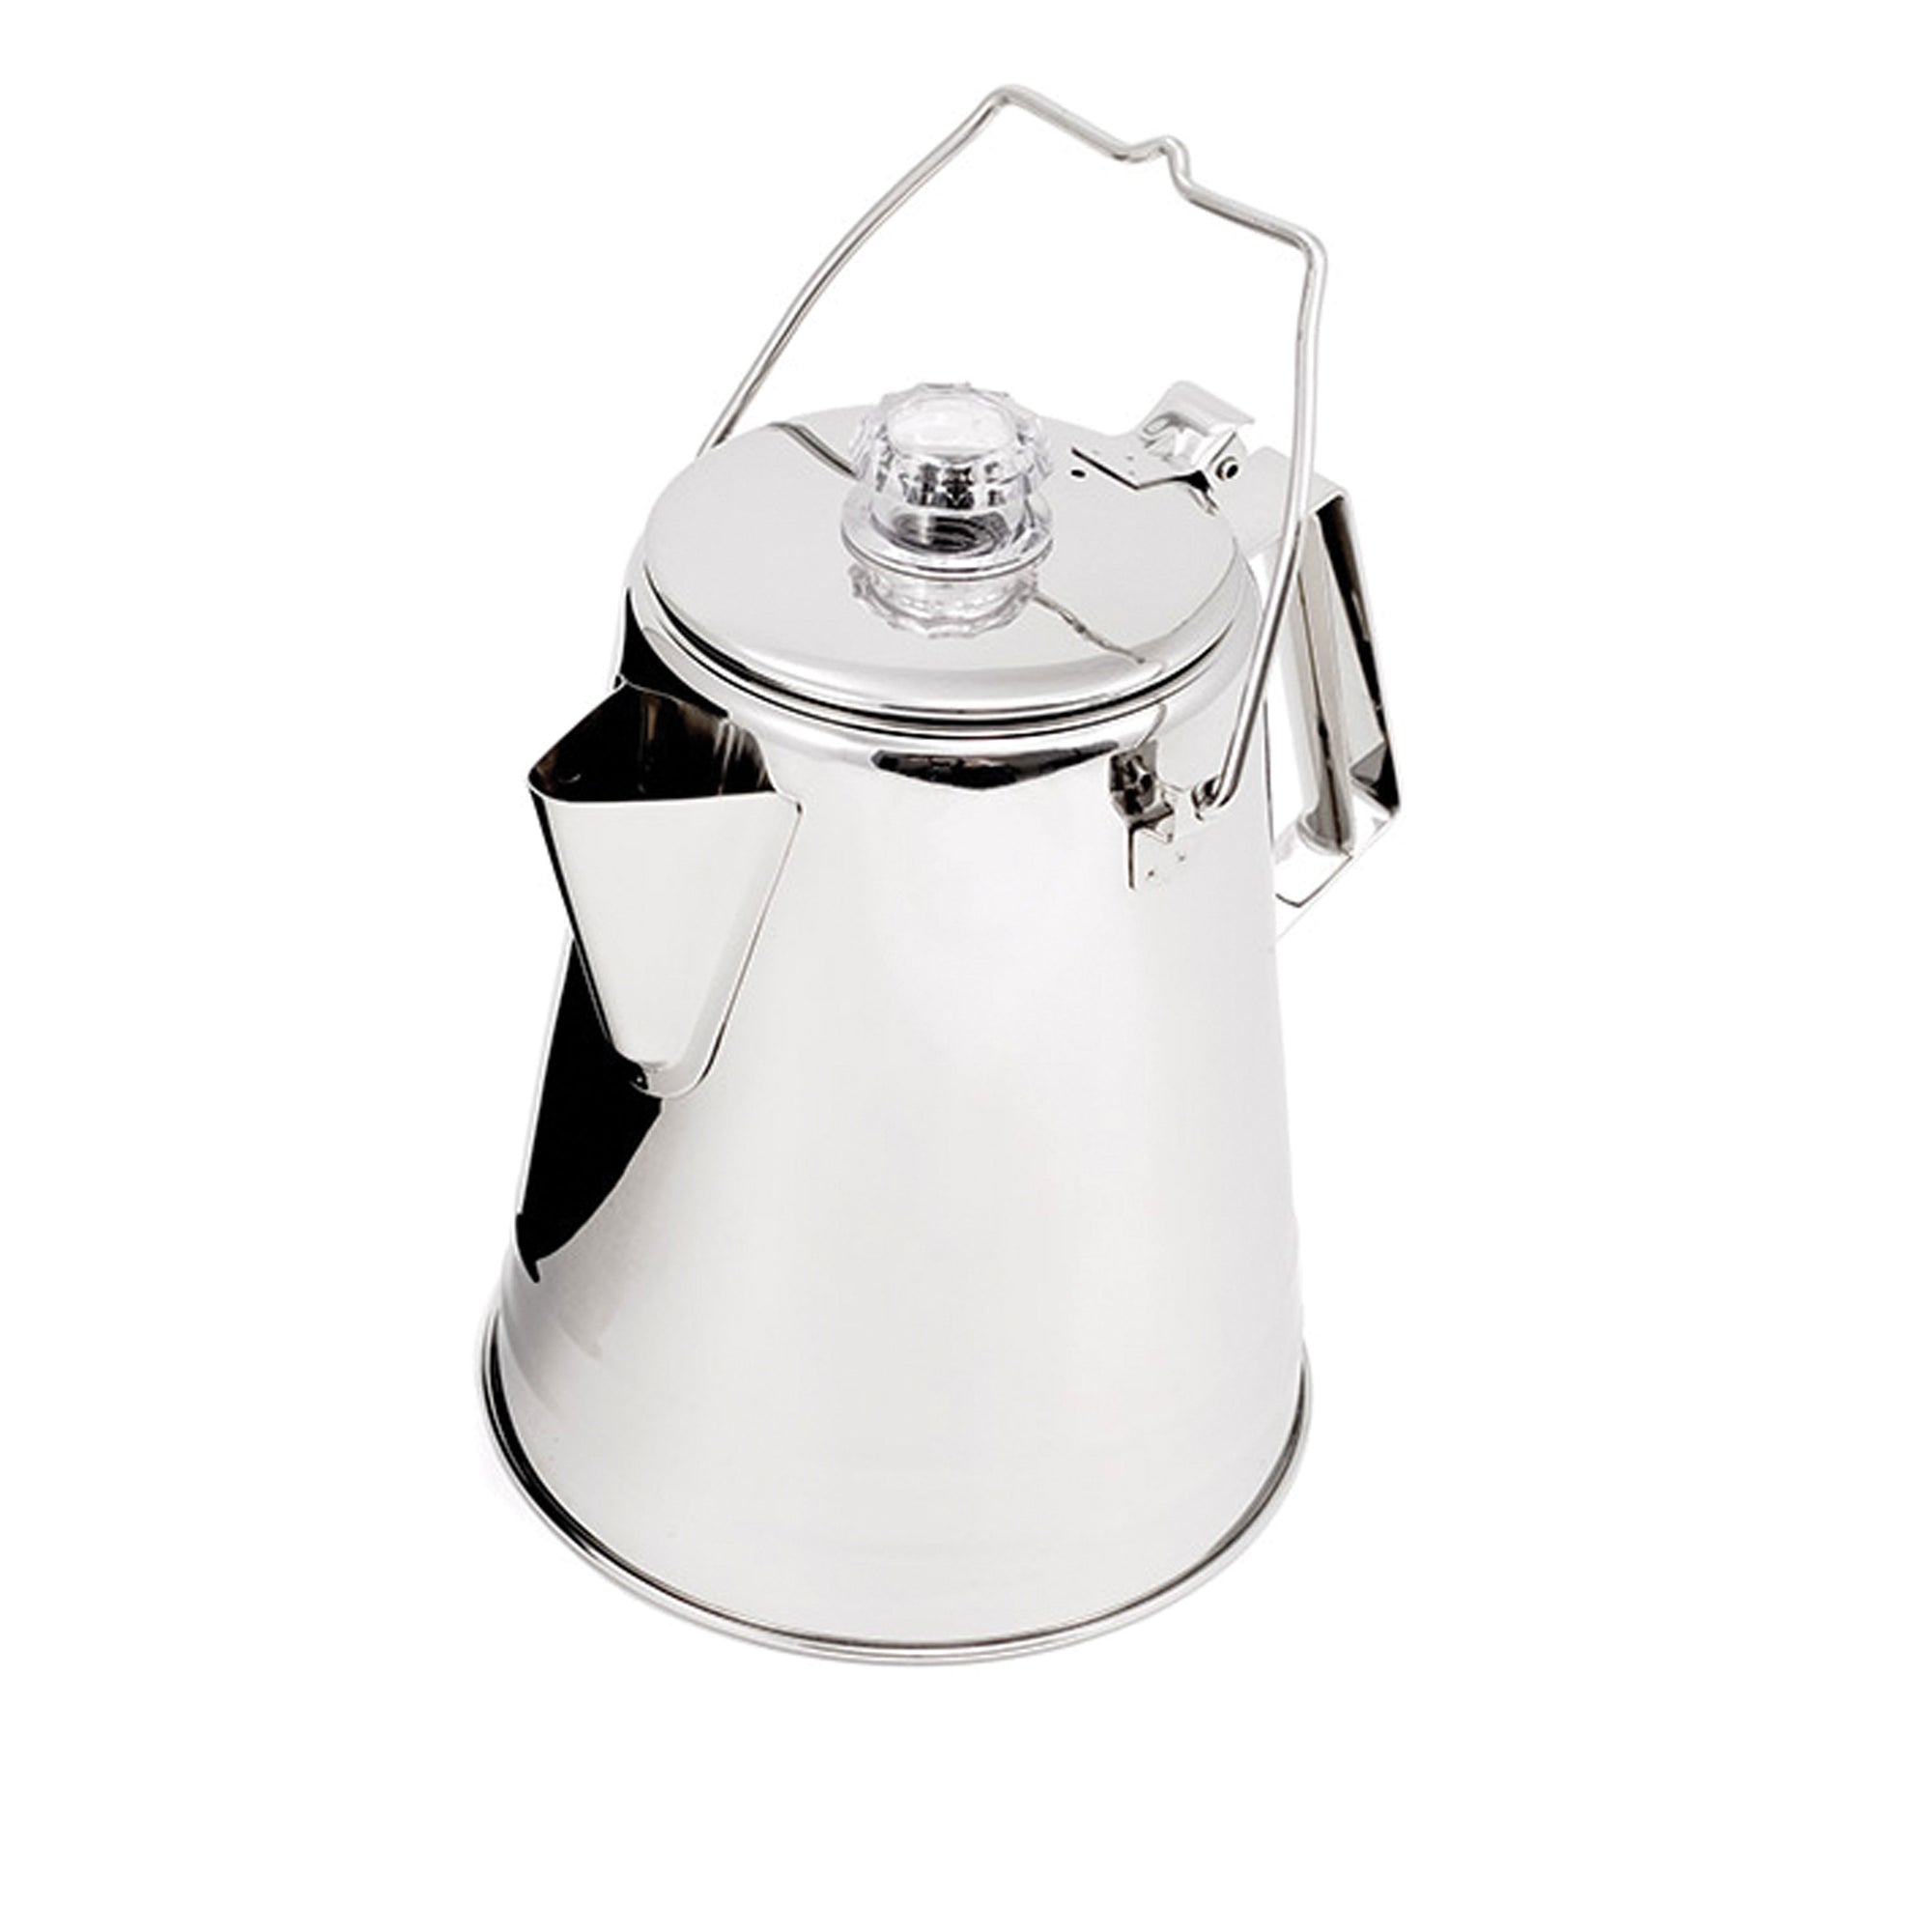 GSI Outdoors Glacier Stainlesss Steel Conical Percolator - 14 Cup